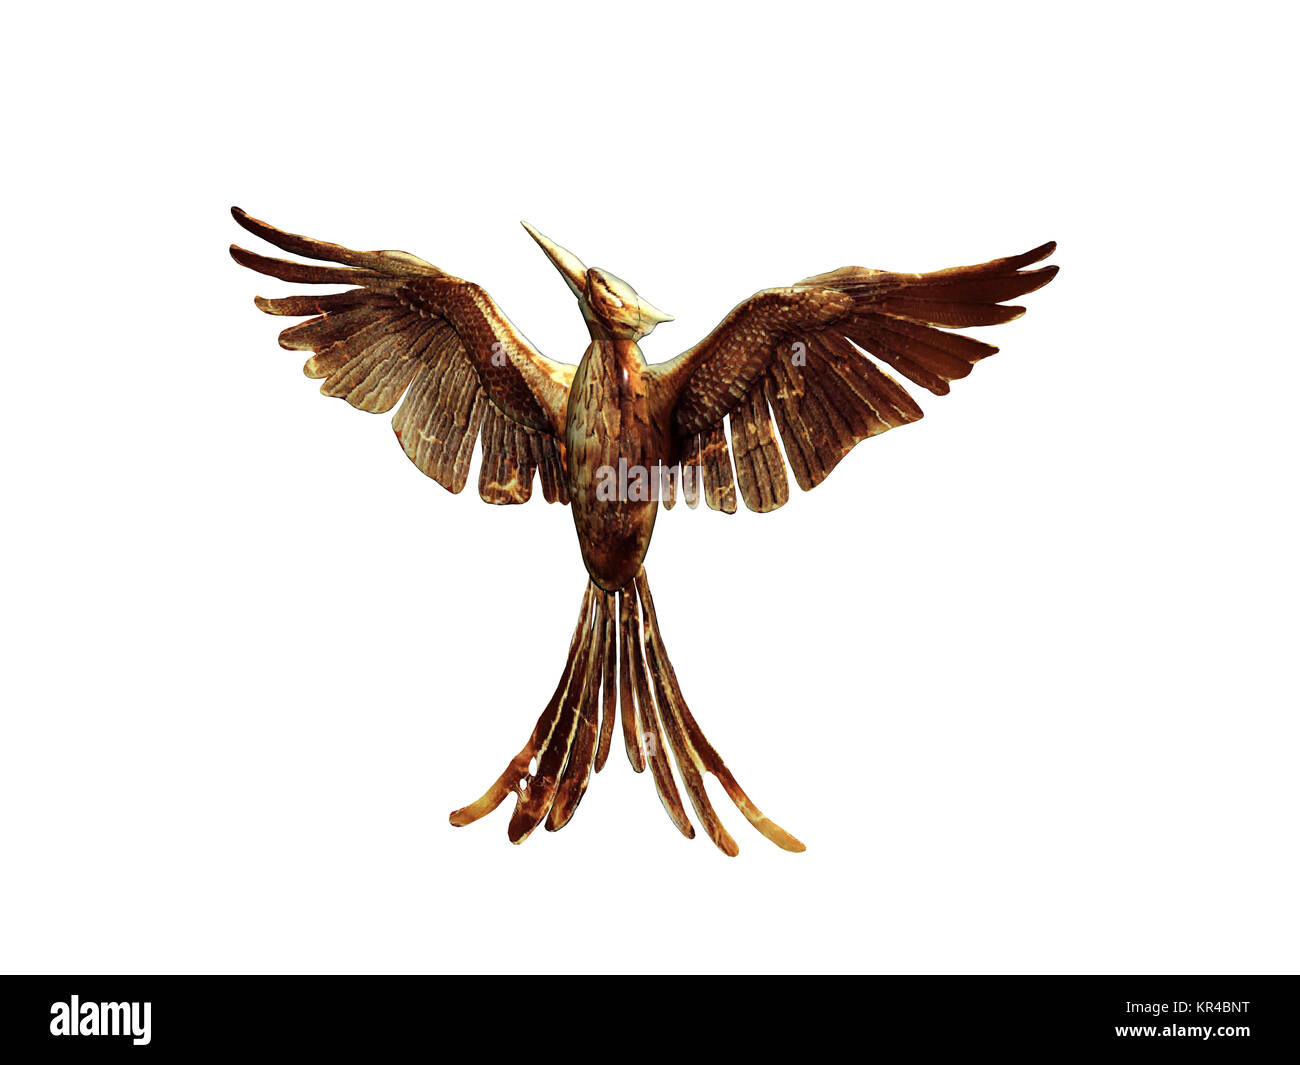 phoenix released from the ashes Stock Photo